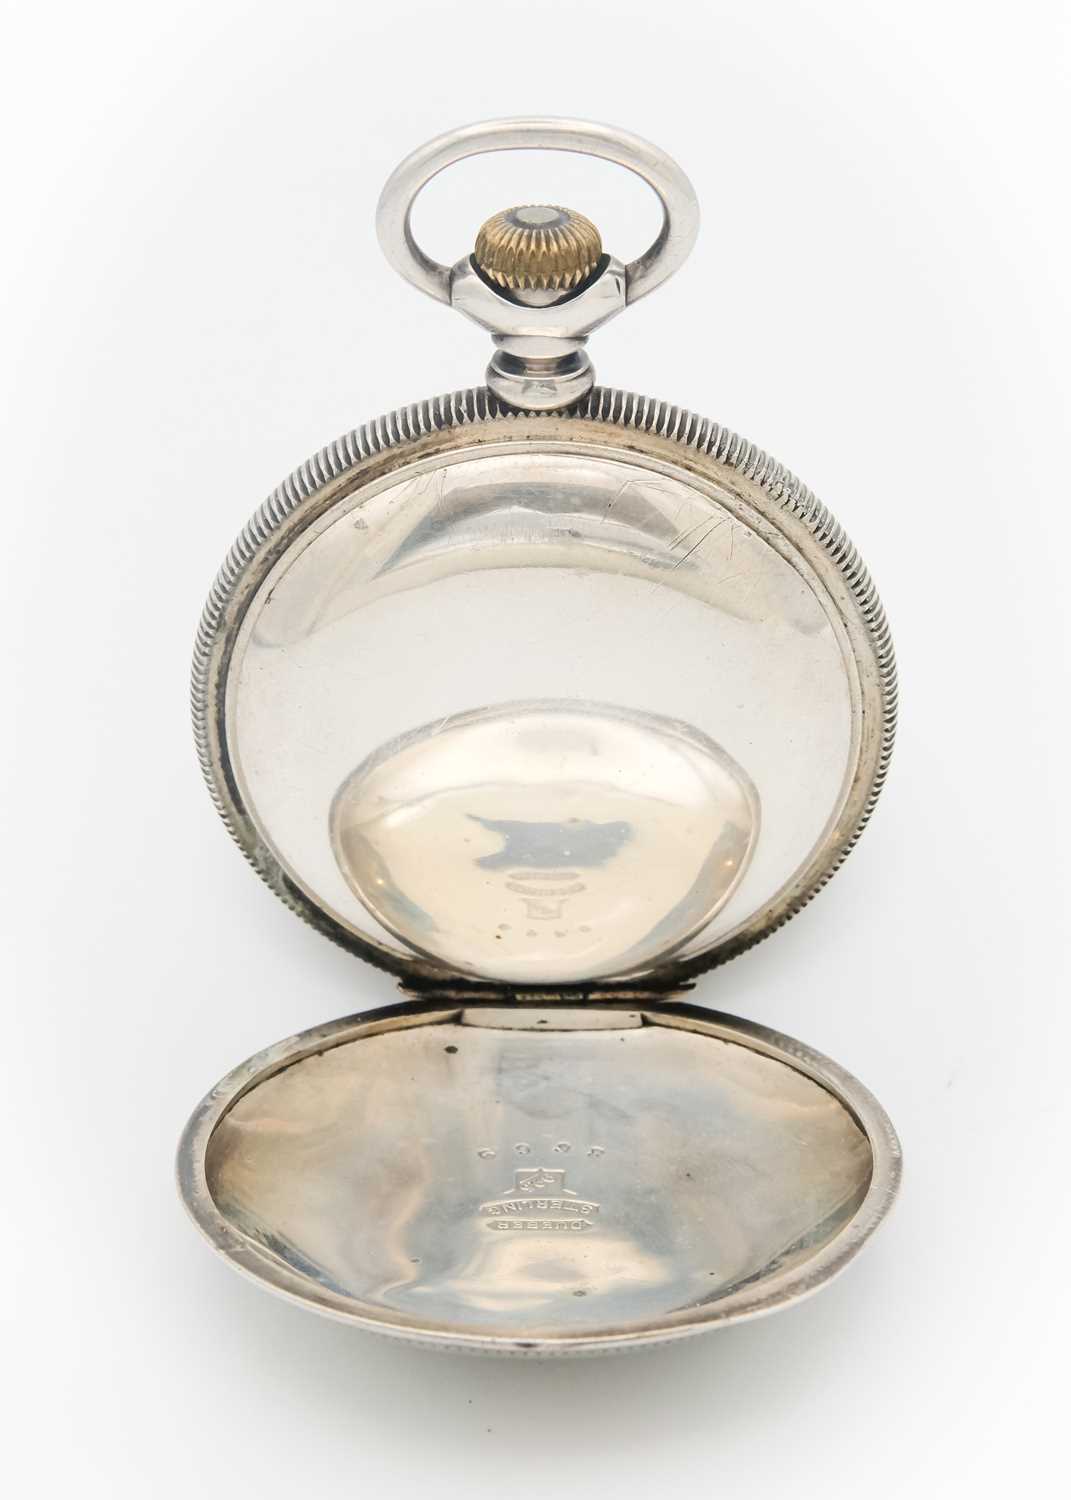 ELGIN - A large silver cased crown wind lever pocket watch. - Image 4 of 6